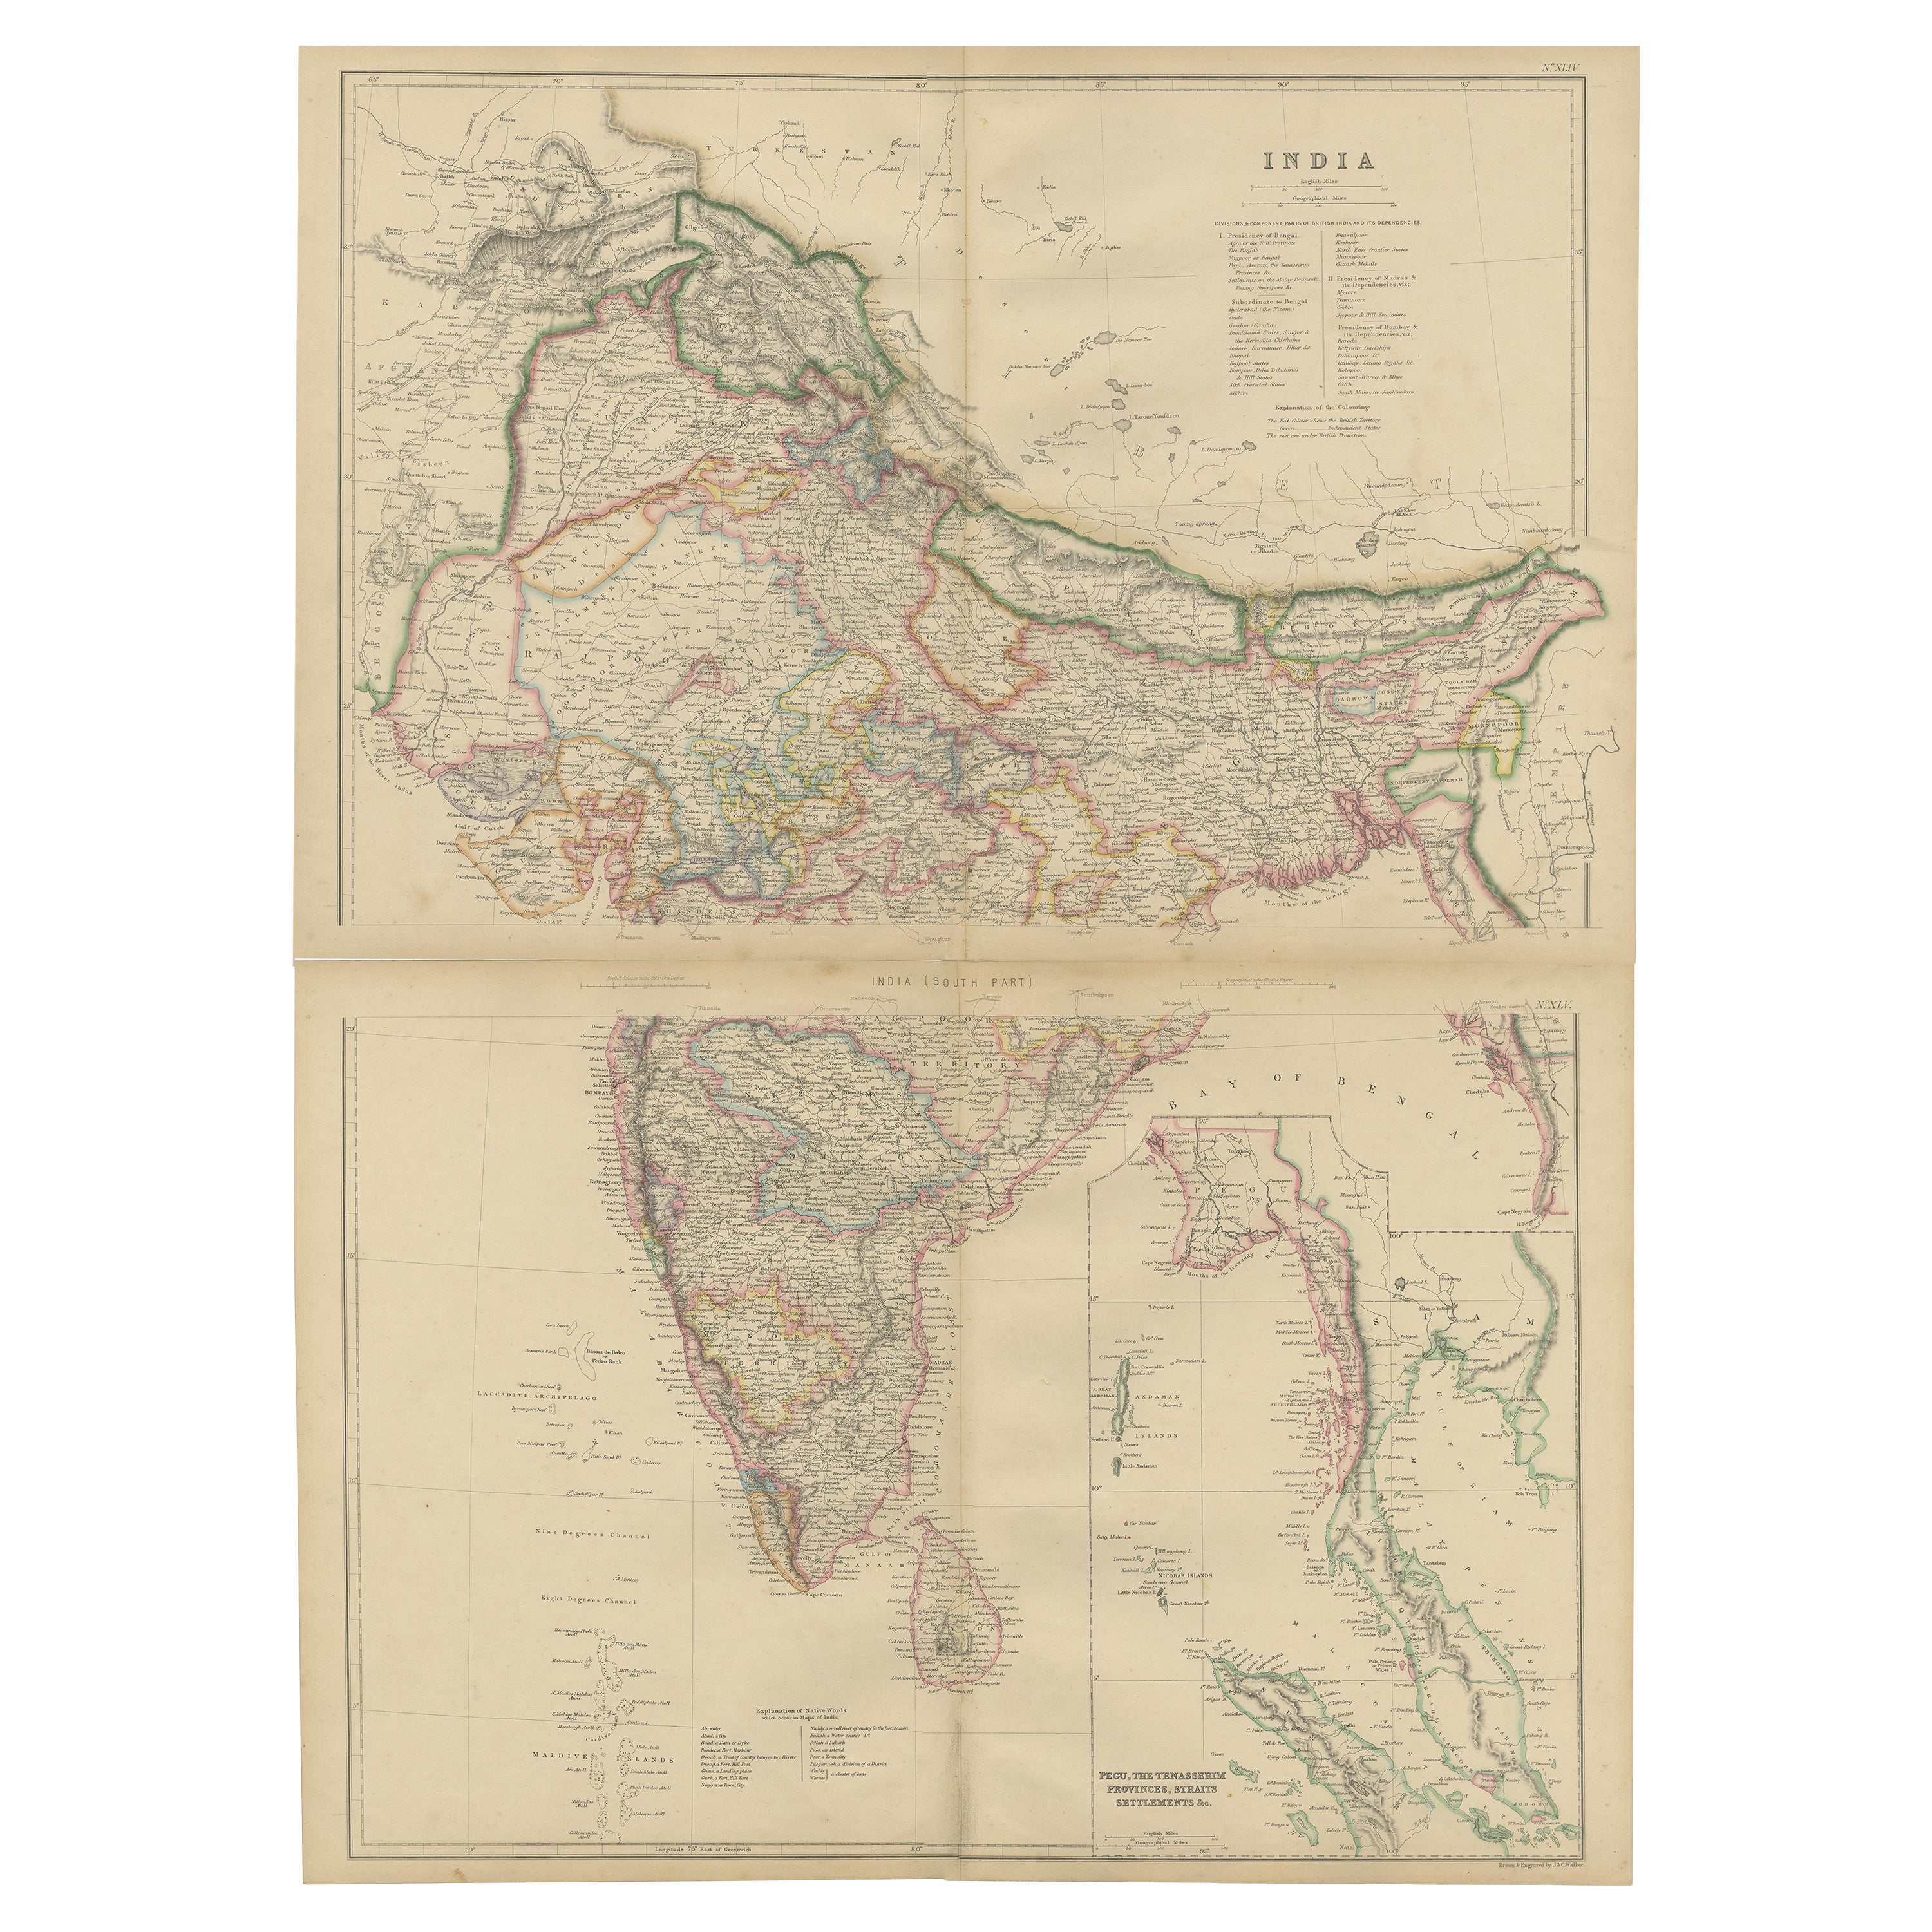 Collection Cartographique Vintage of India Explored - W. G. Blackie's 1859 